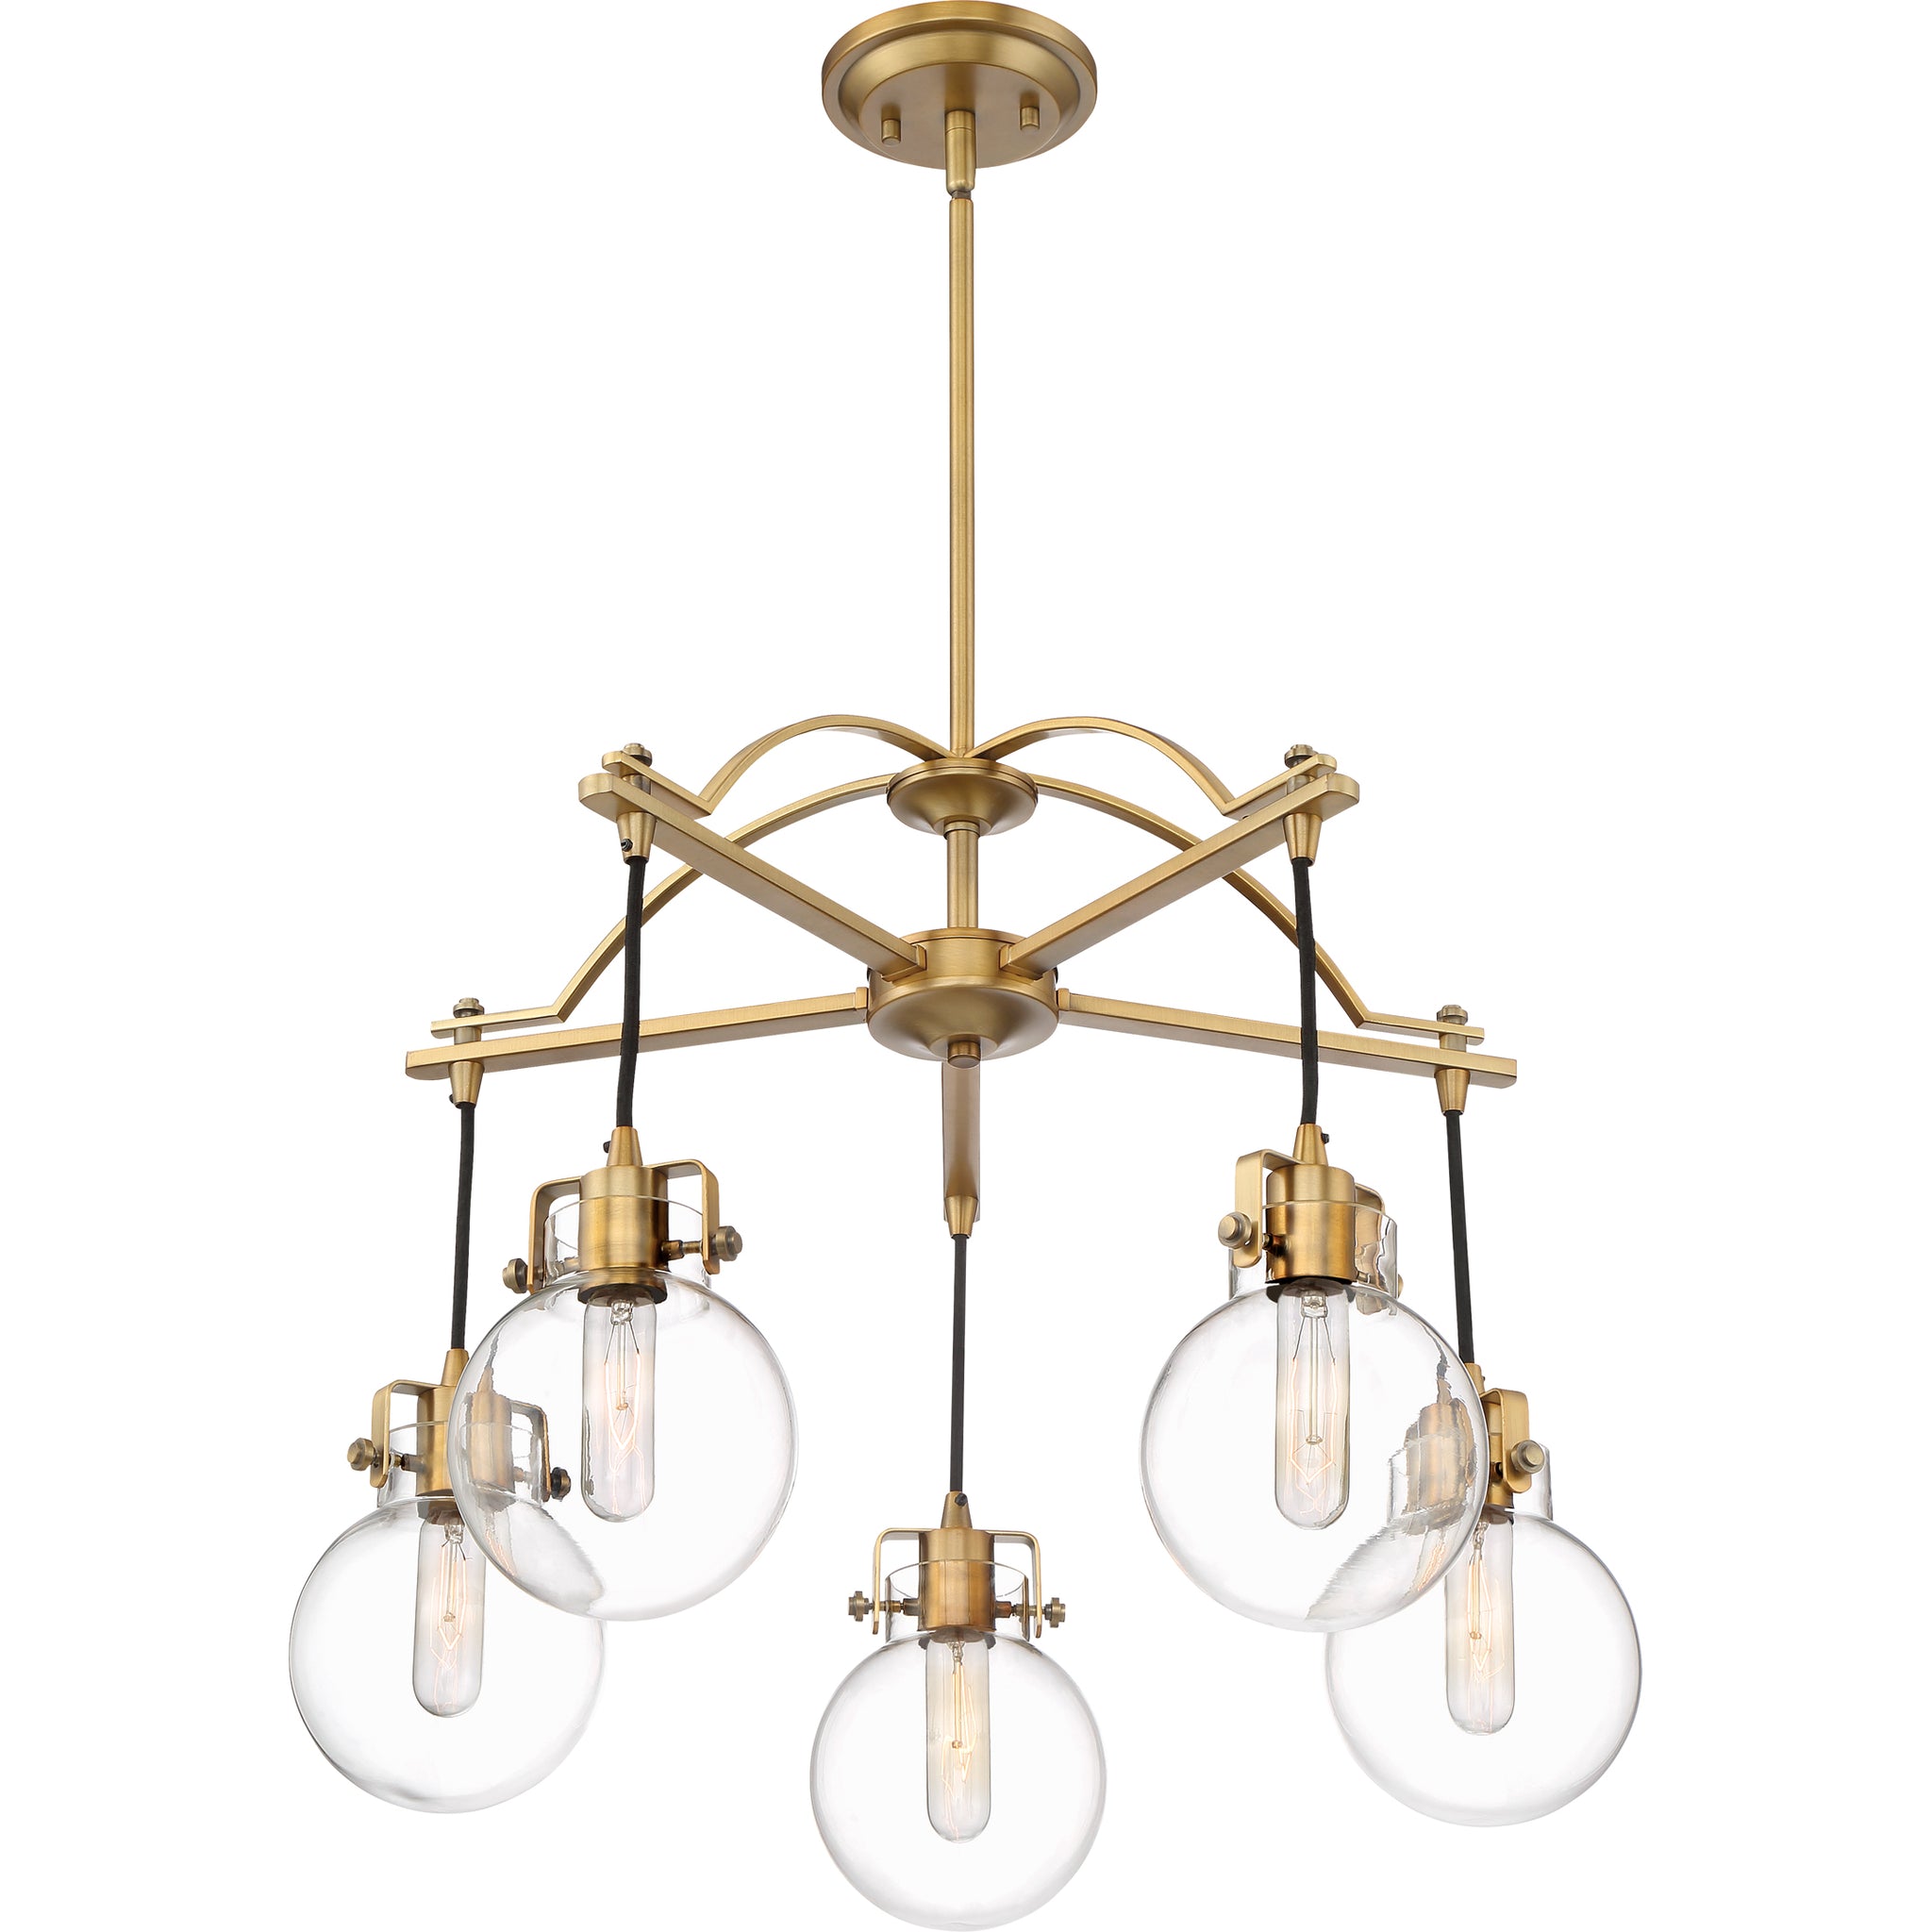 Sidwell Chandelier Weathered Brass